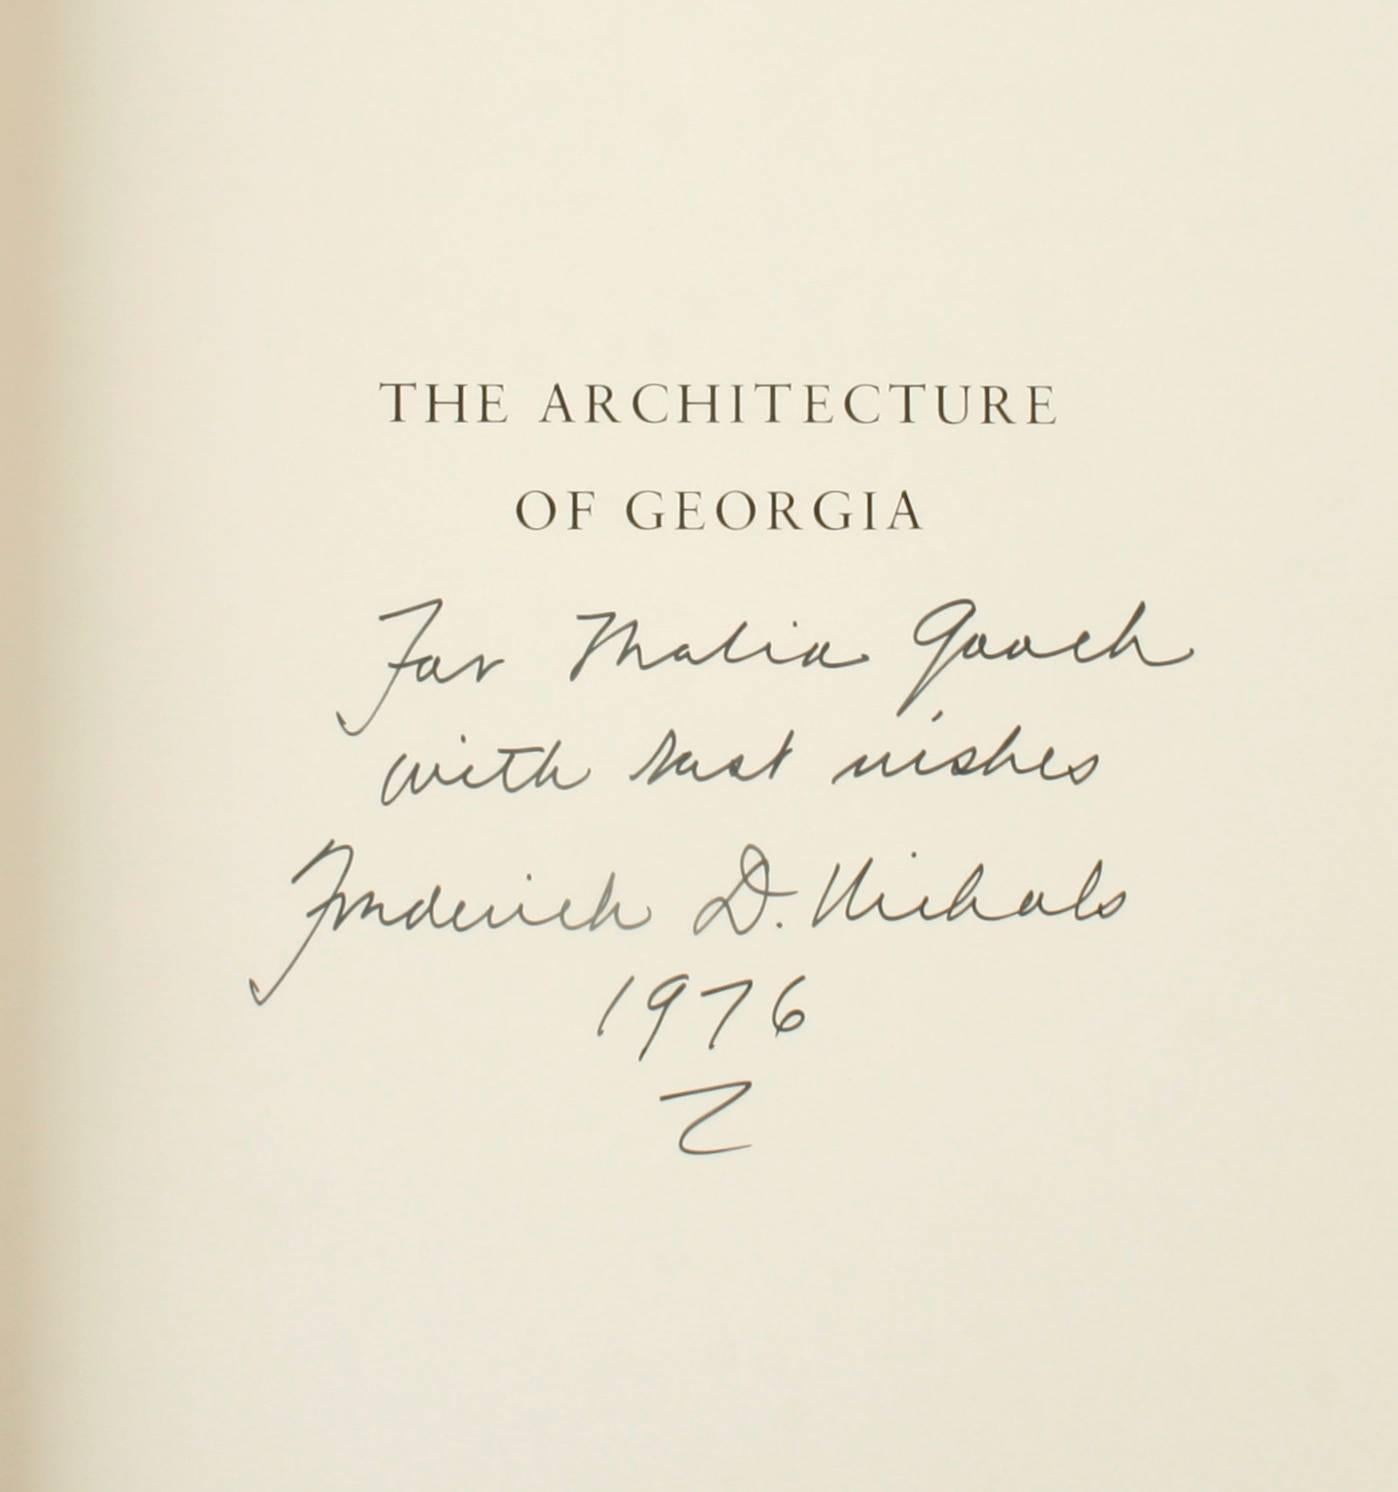 The architecture of Georgia by Frederick Nichols signed First Edition. The Beehive Press, Savannah, 1976, Hardcover. "This is the first complete survey of Georgia architecture between the Revolution and the Civil War and probably the most